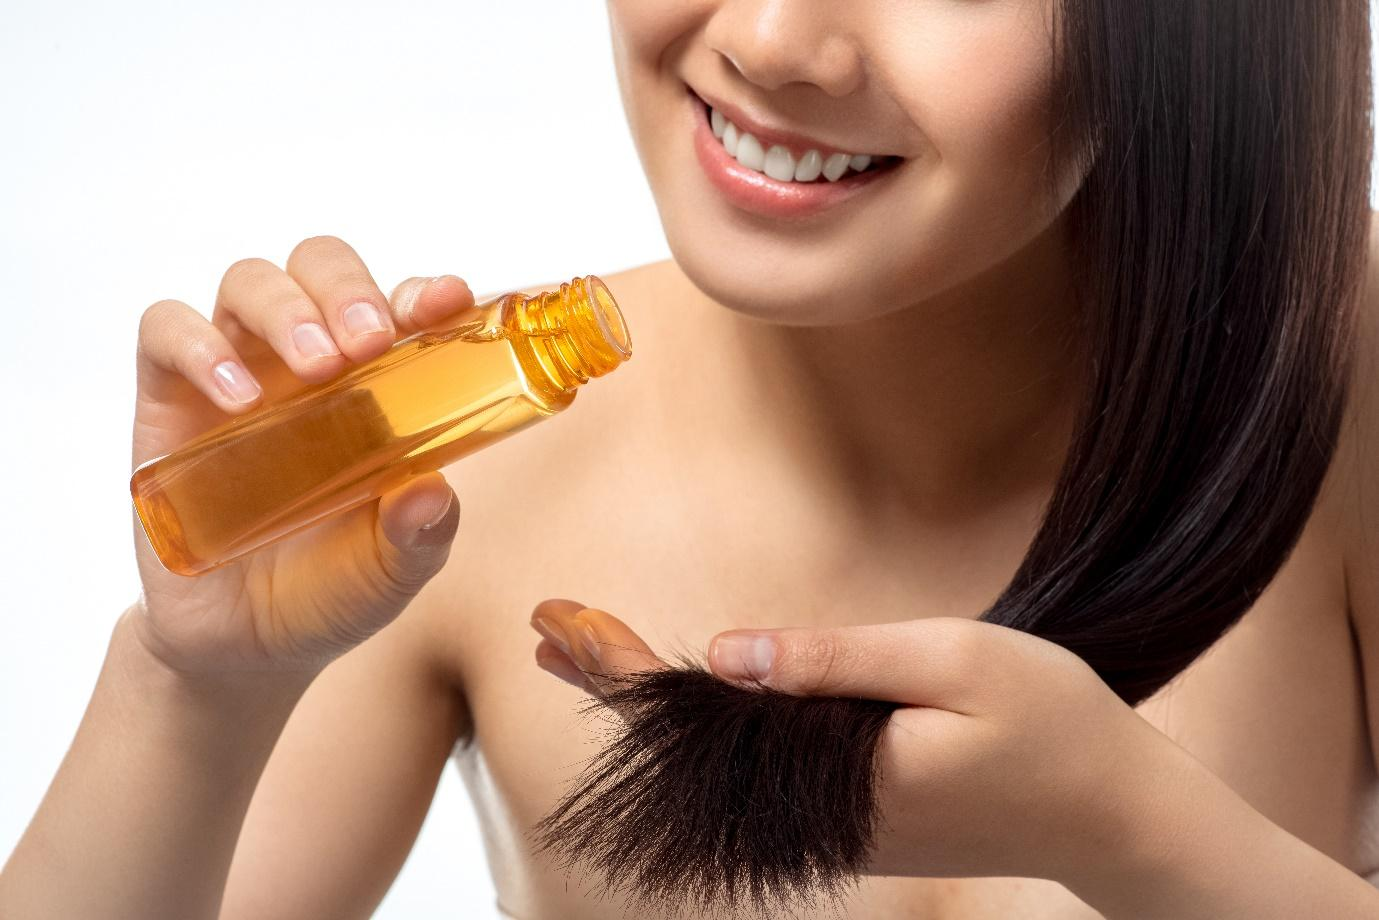 5 Tips for Effective Hair Care at Home